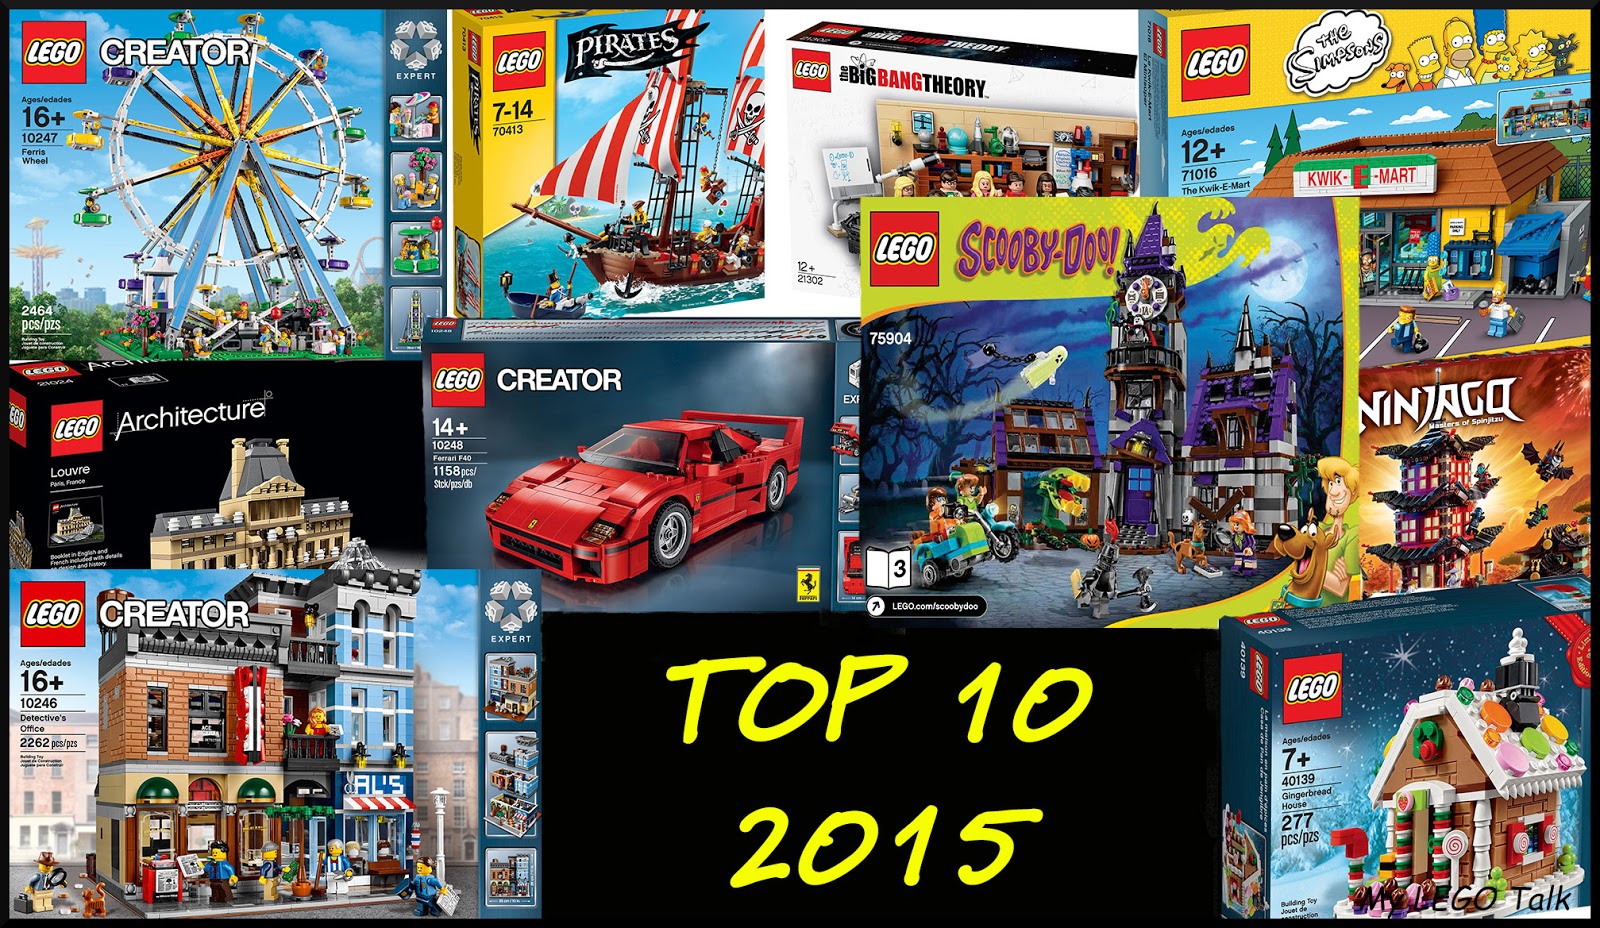 TOP 10 LEGO sets released 2015 - My Lego Talk